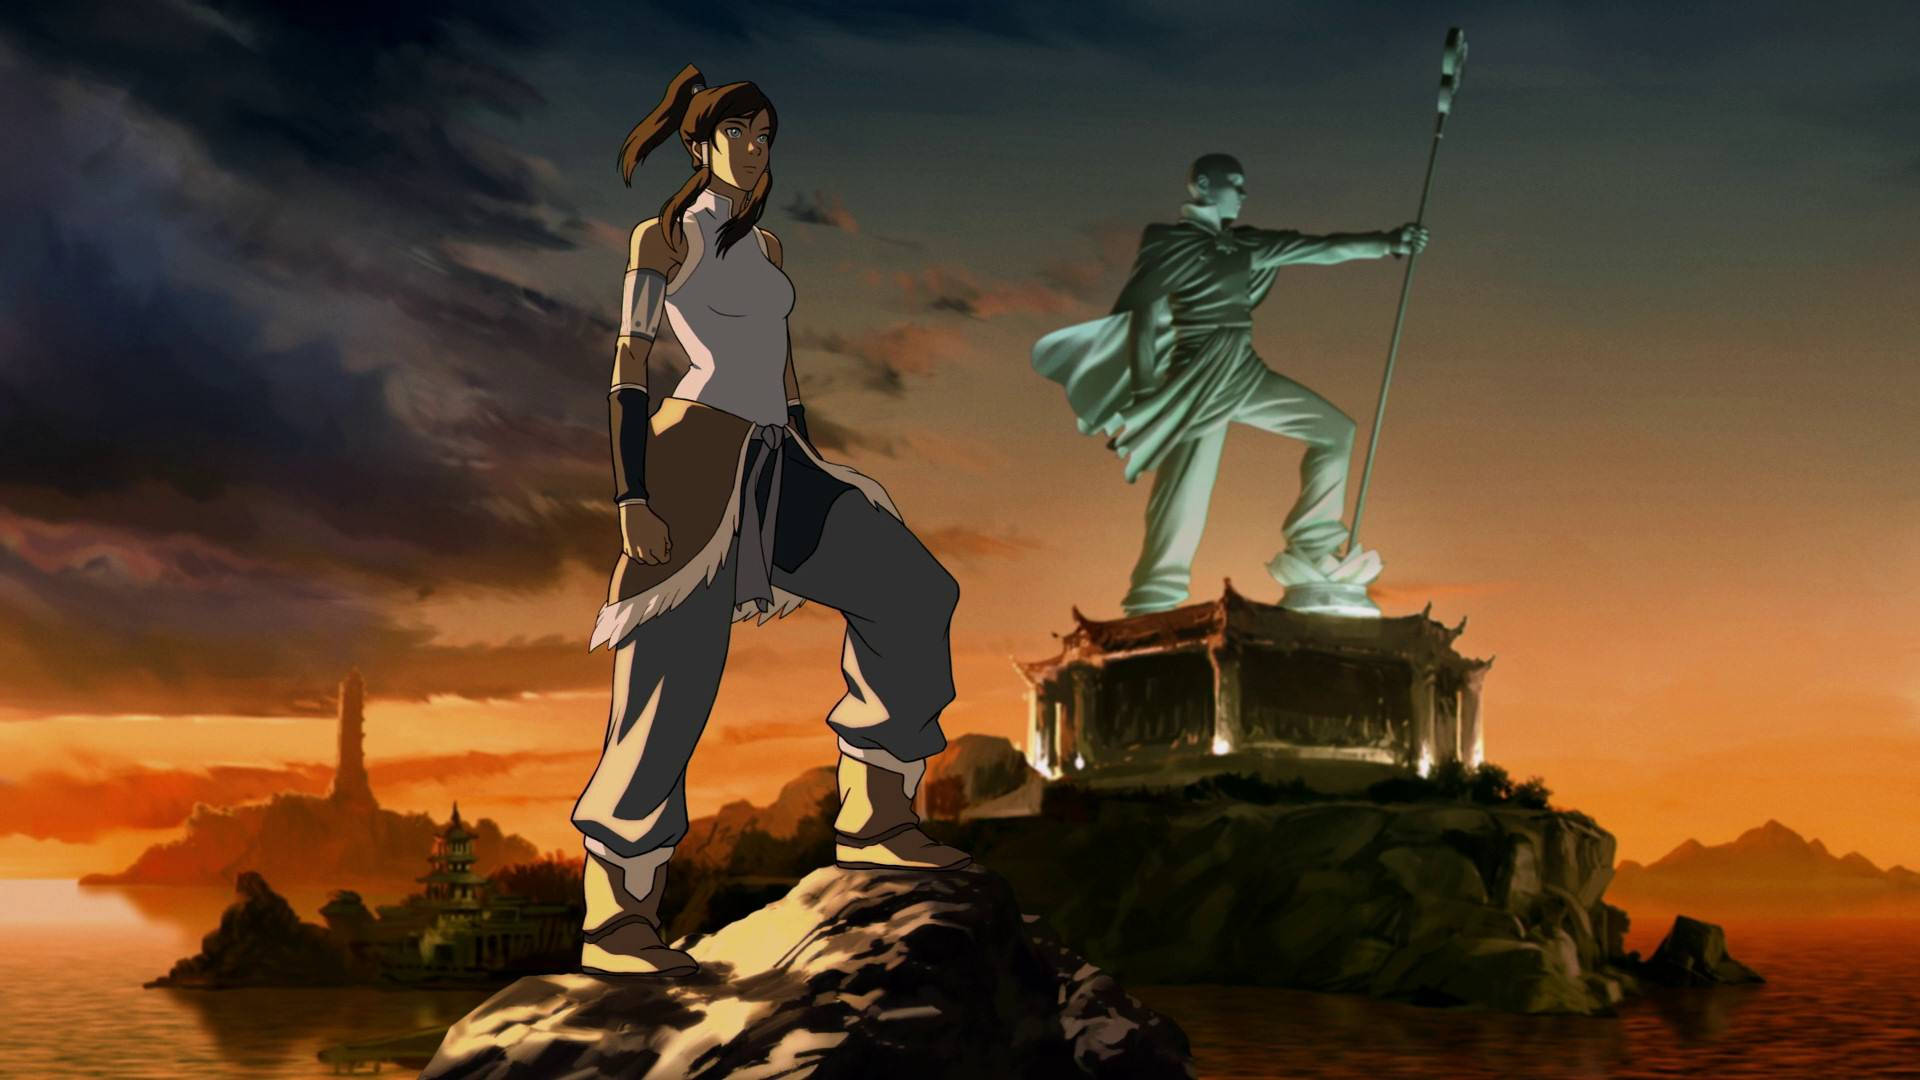 The Legend Of Korra With Aang Statue Background